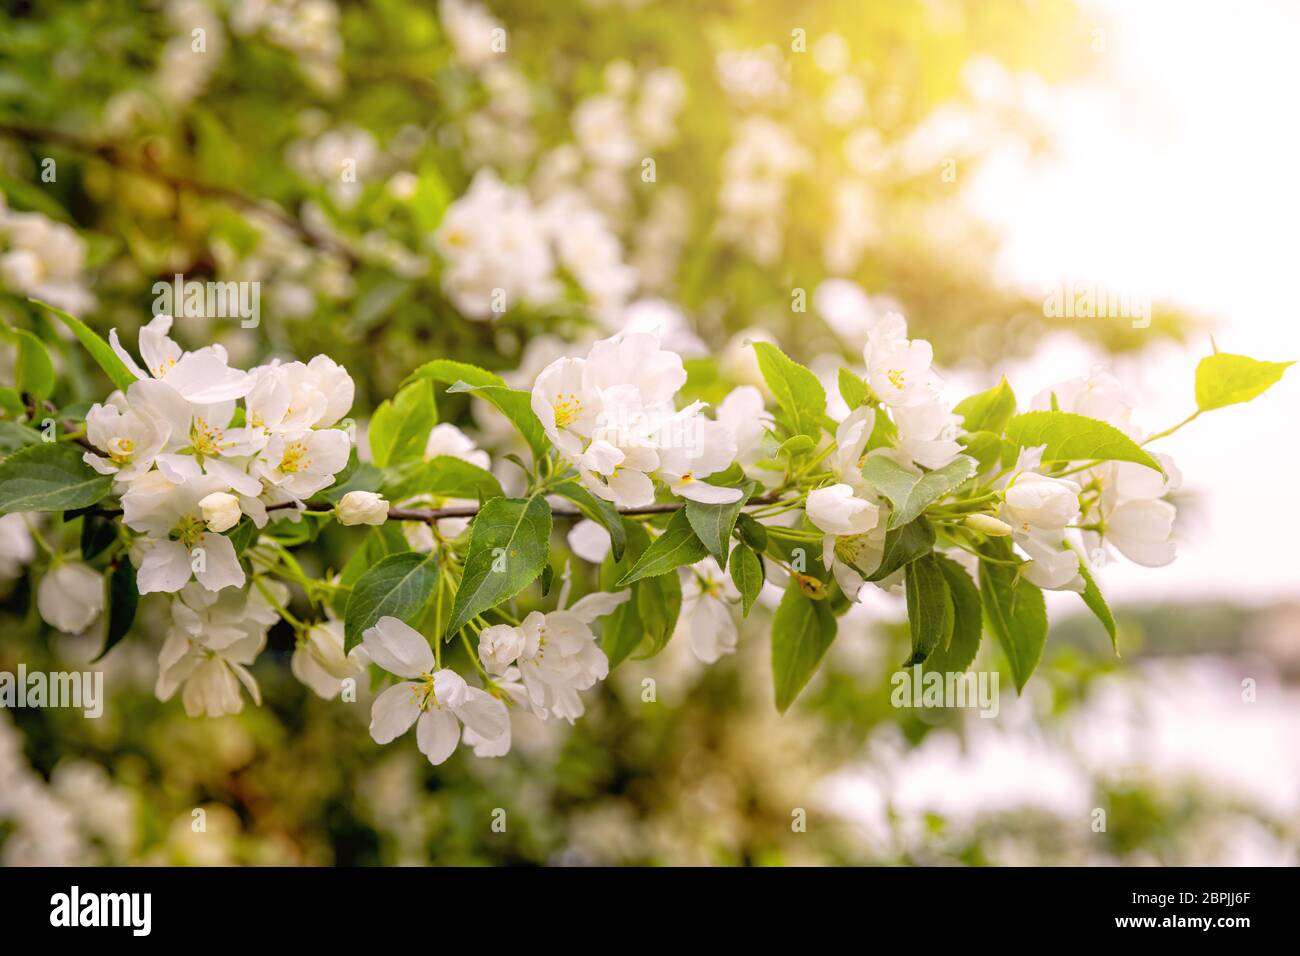 Spring natural background. Branch of blossoming apple tree with delicate flowers and buds in the sunlight Stock Photo